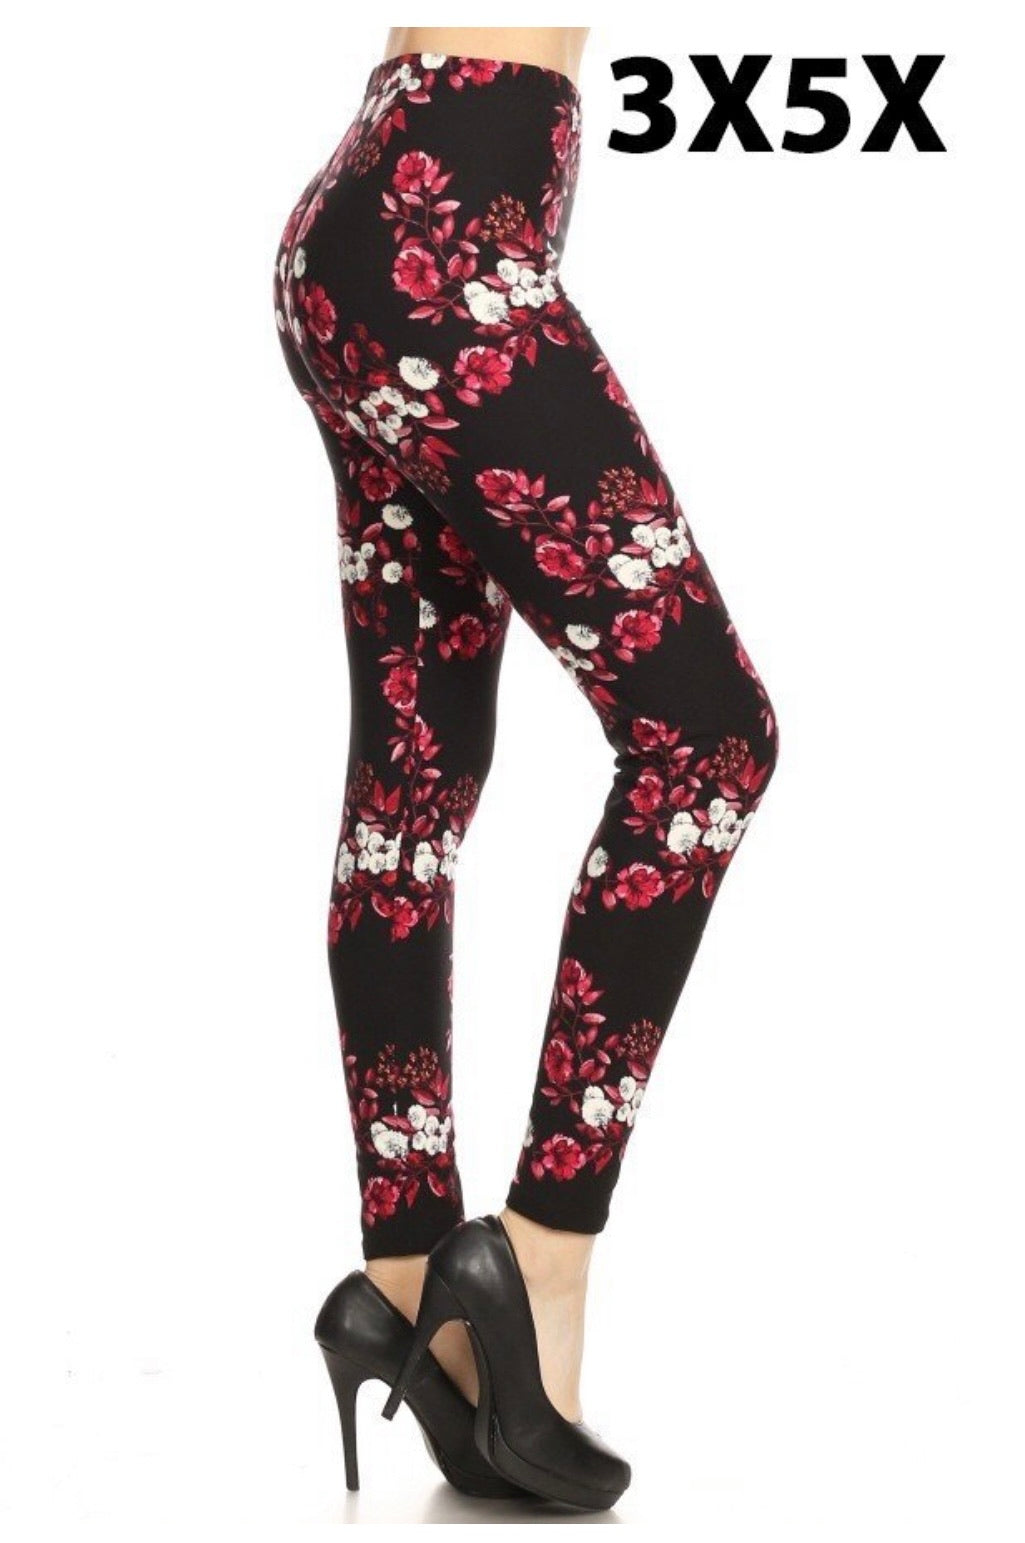 LEG-35 {The Thing Is} Black Floral Leggings EXTENDED PLUS SIZE 3X/5X –  Curvy Boutique Plus Size Clothing